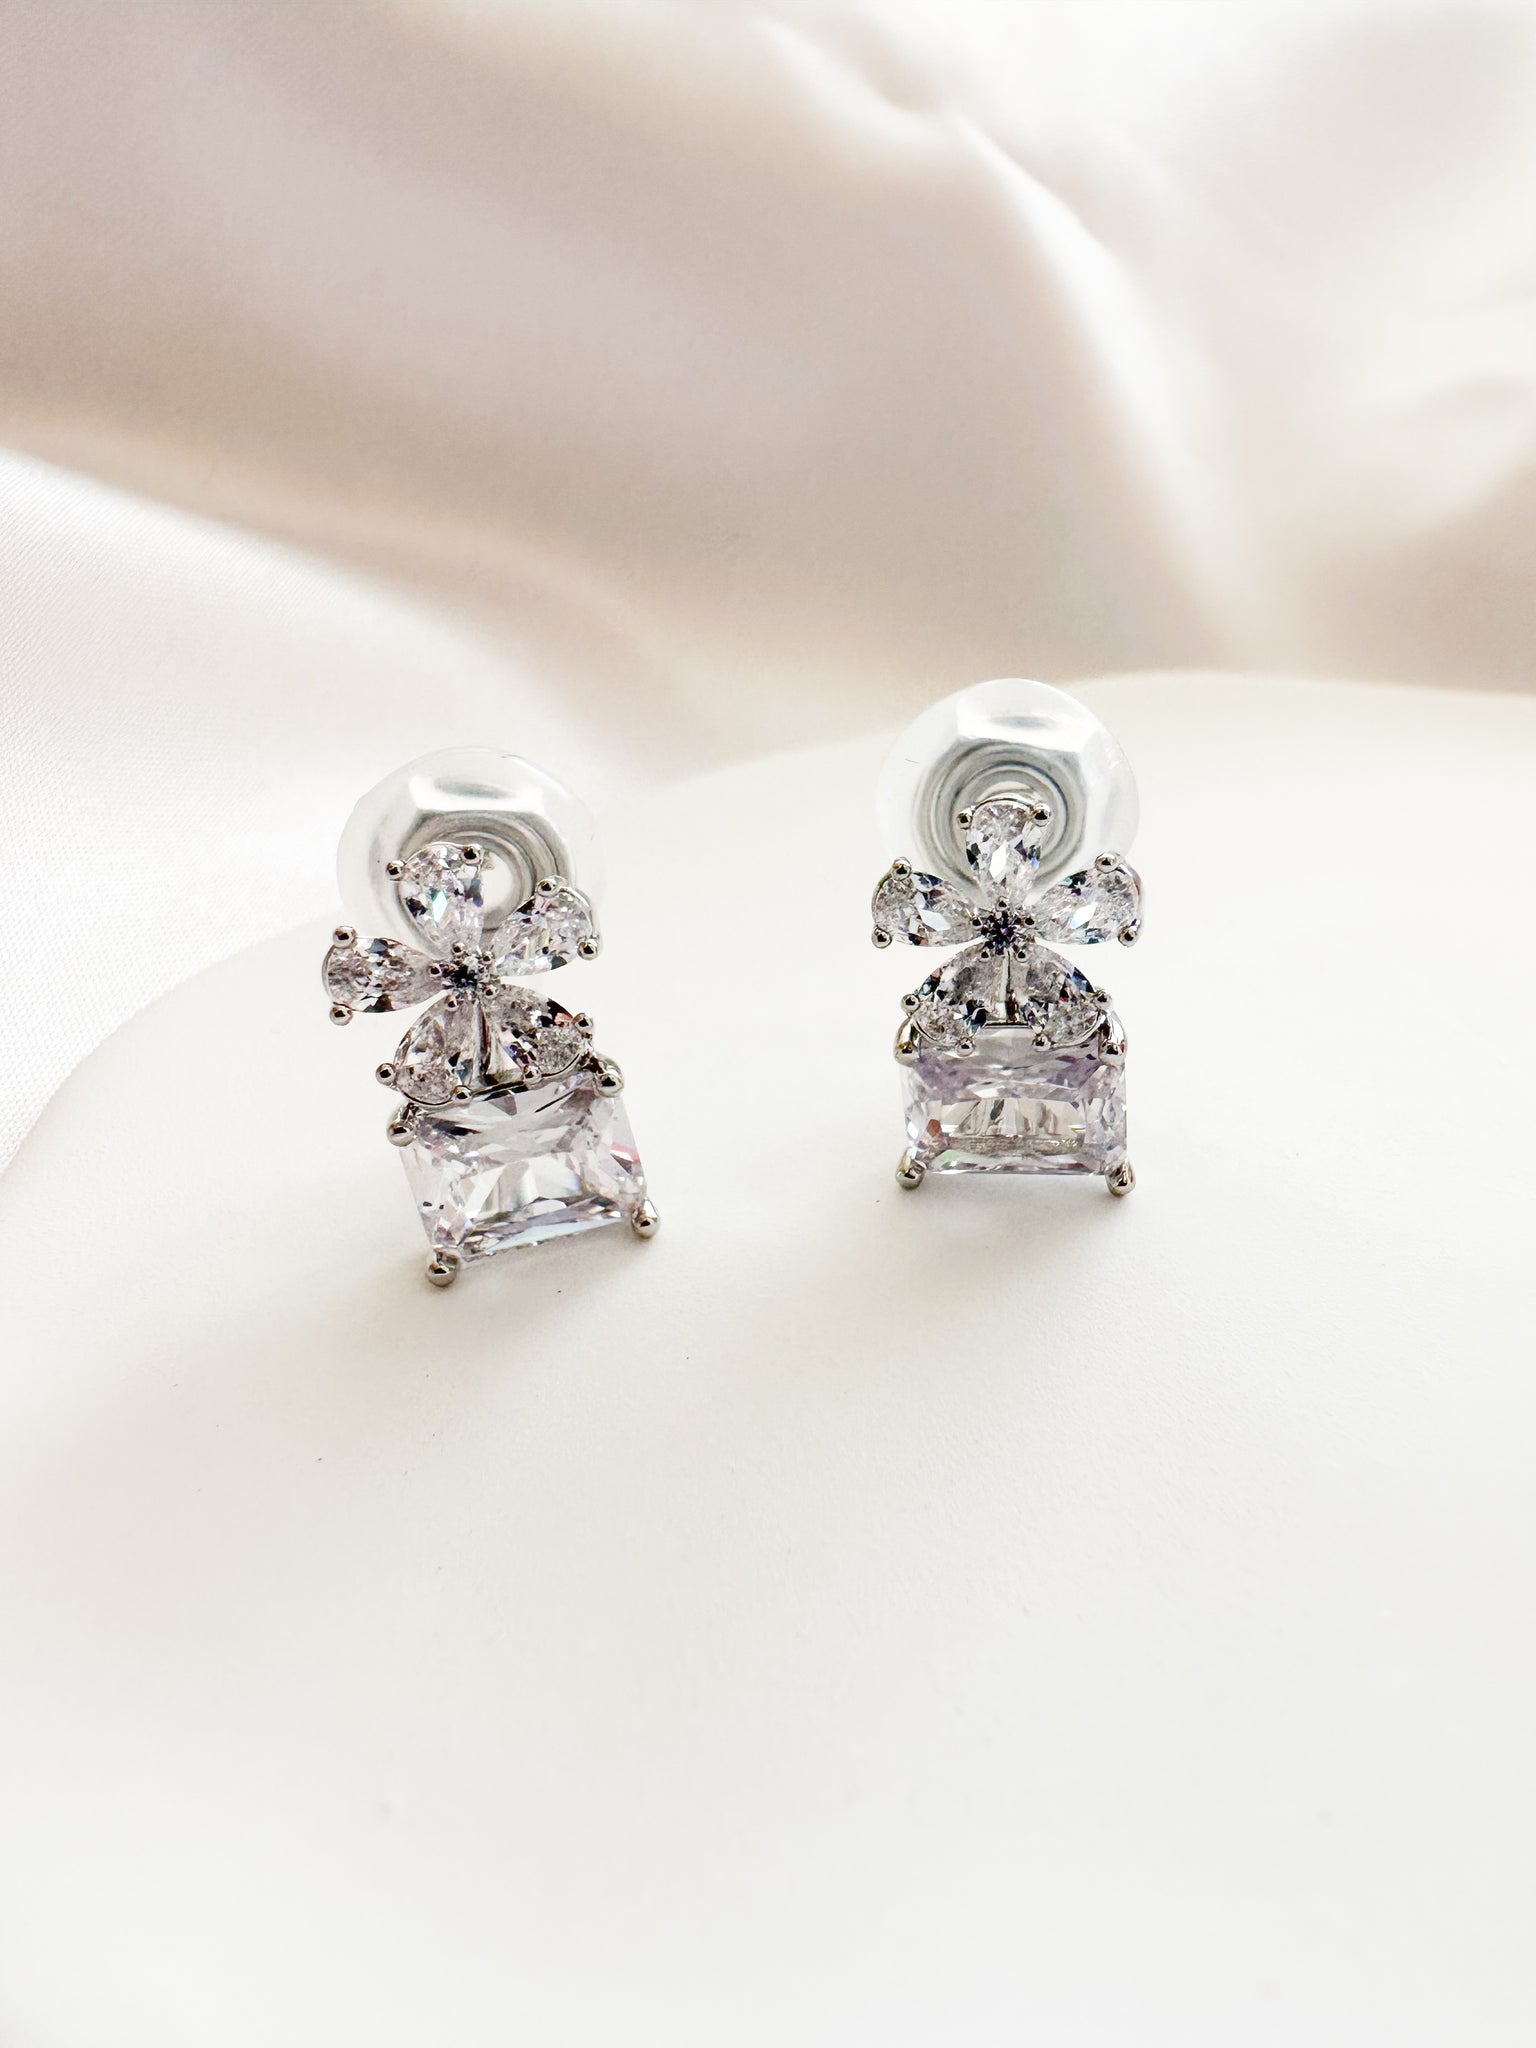 silver & white cubic zirconia shaped into a flower atop a square gem clipon earrings